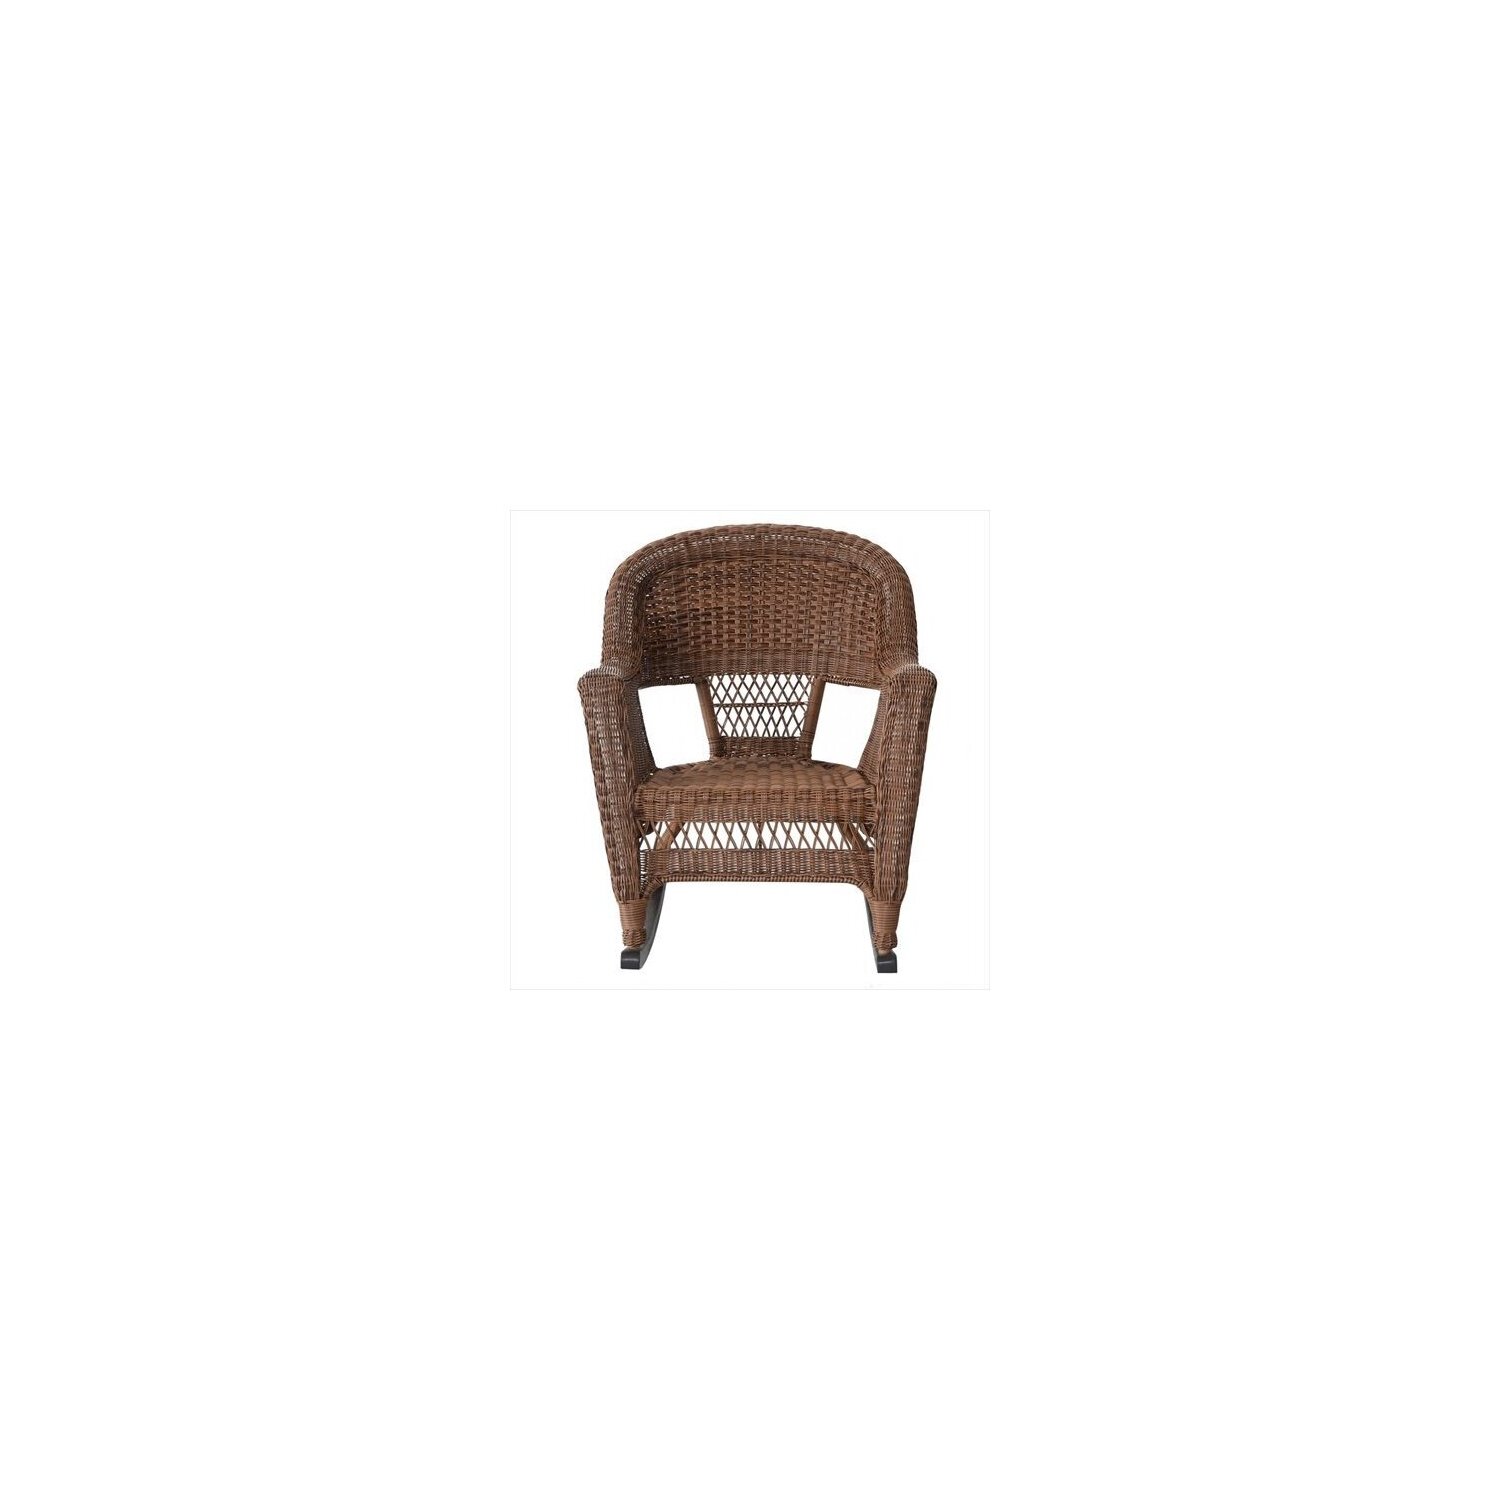 Jeco 3pc Rocker Wicker Chair Set With Green Cushion-Finish:Honey - image 2 of 2